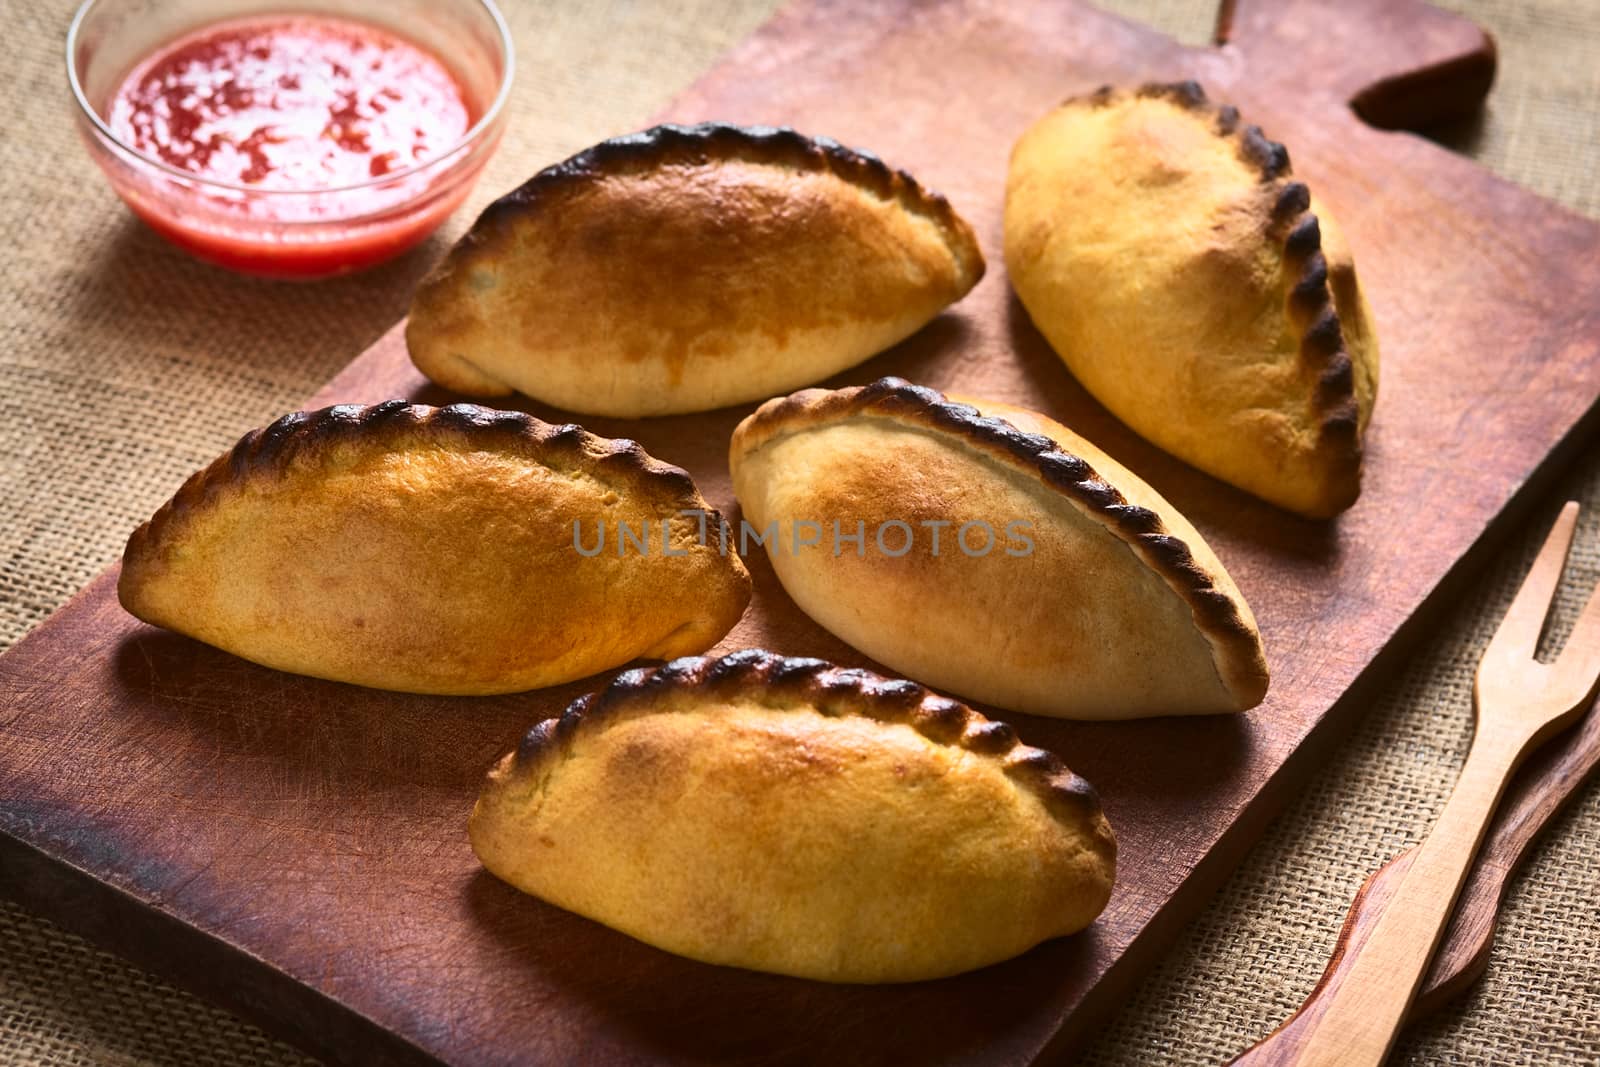 Traditional Bolivian savory pastries called Saltena filled with thick meat stew, which is a popular street snack in Bolivia, photographed on wood with natural light (Selective Focus, Focus on the saltenas in the middle)